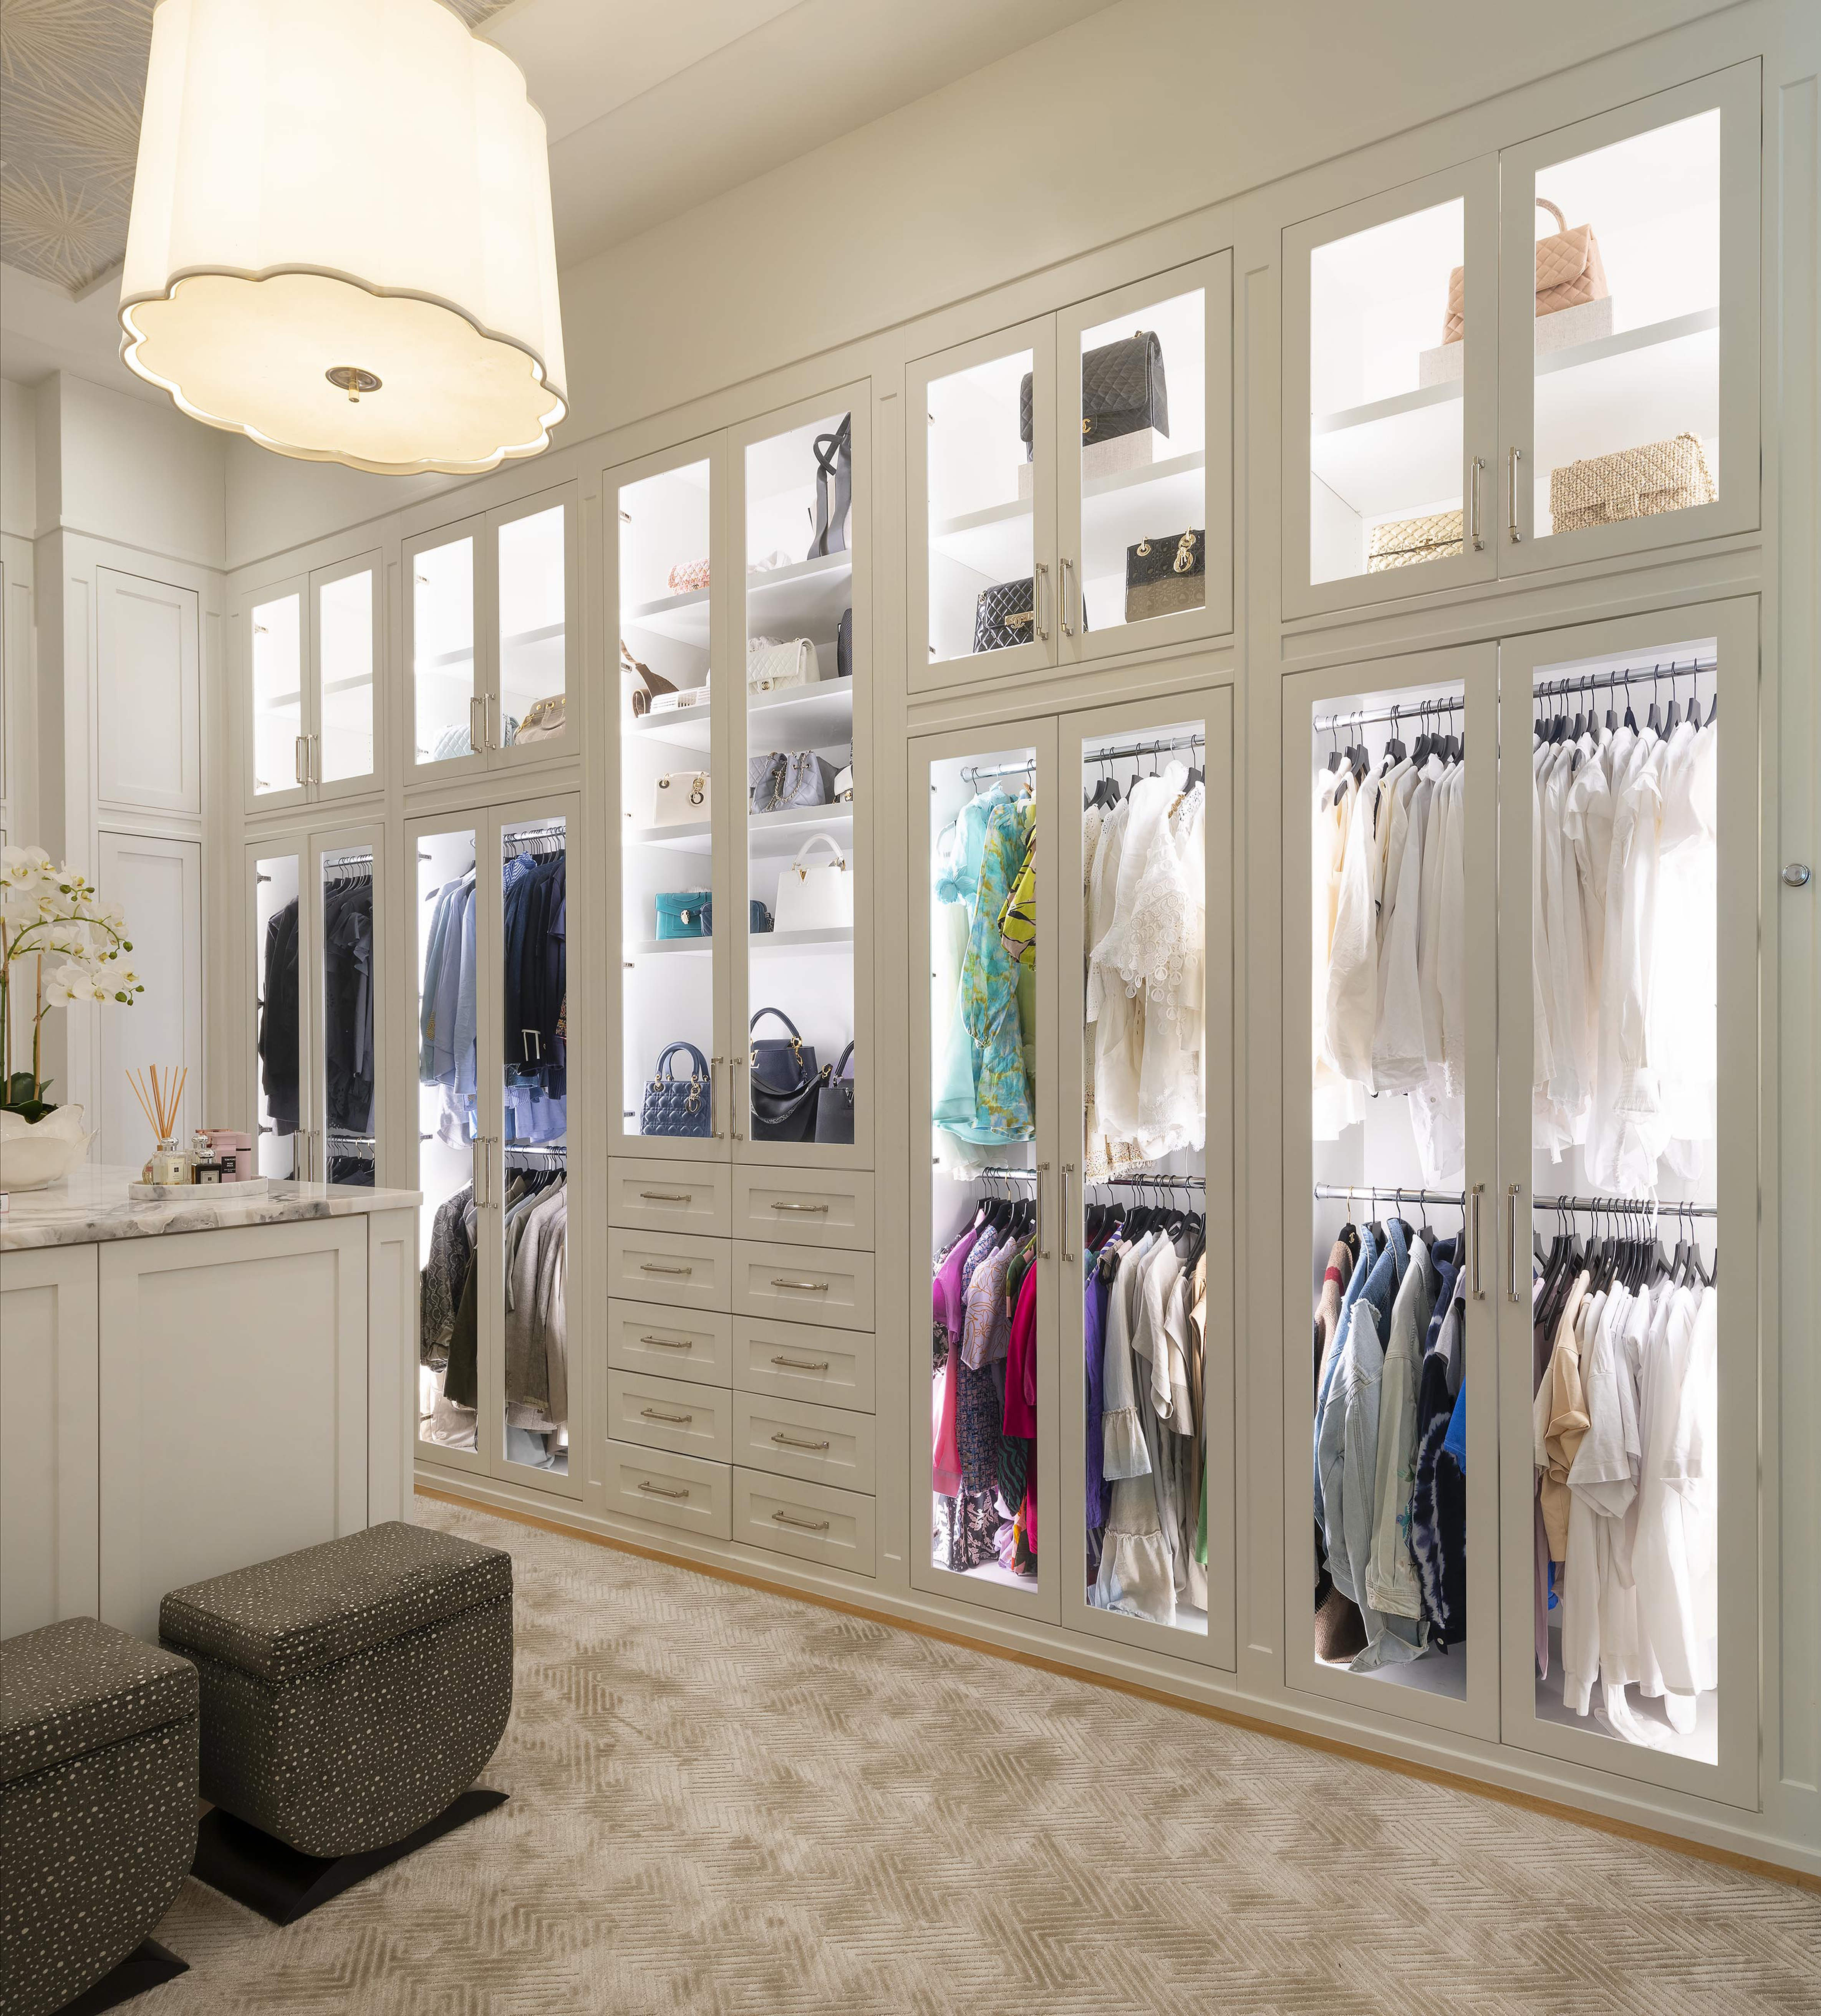 Luxury closet with double-sided island